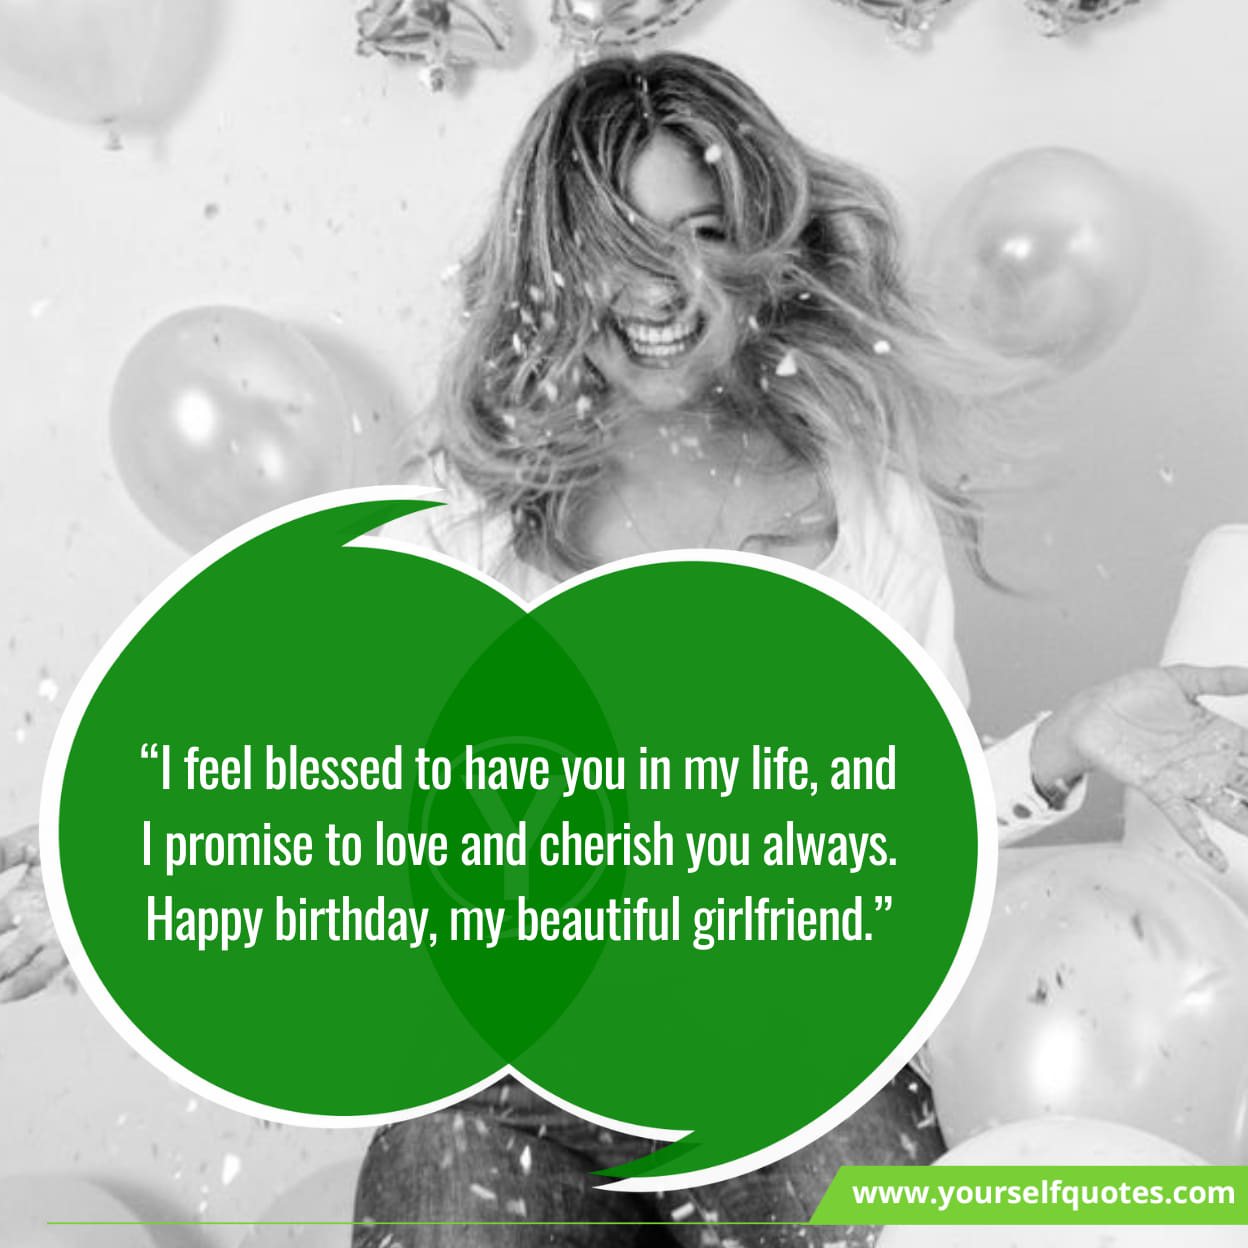 Lovely Messages On Birthday of Girlfriend